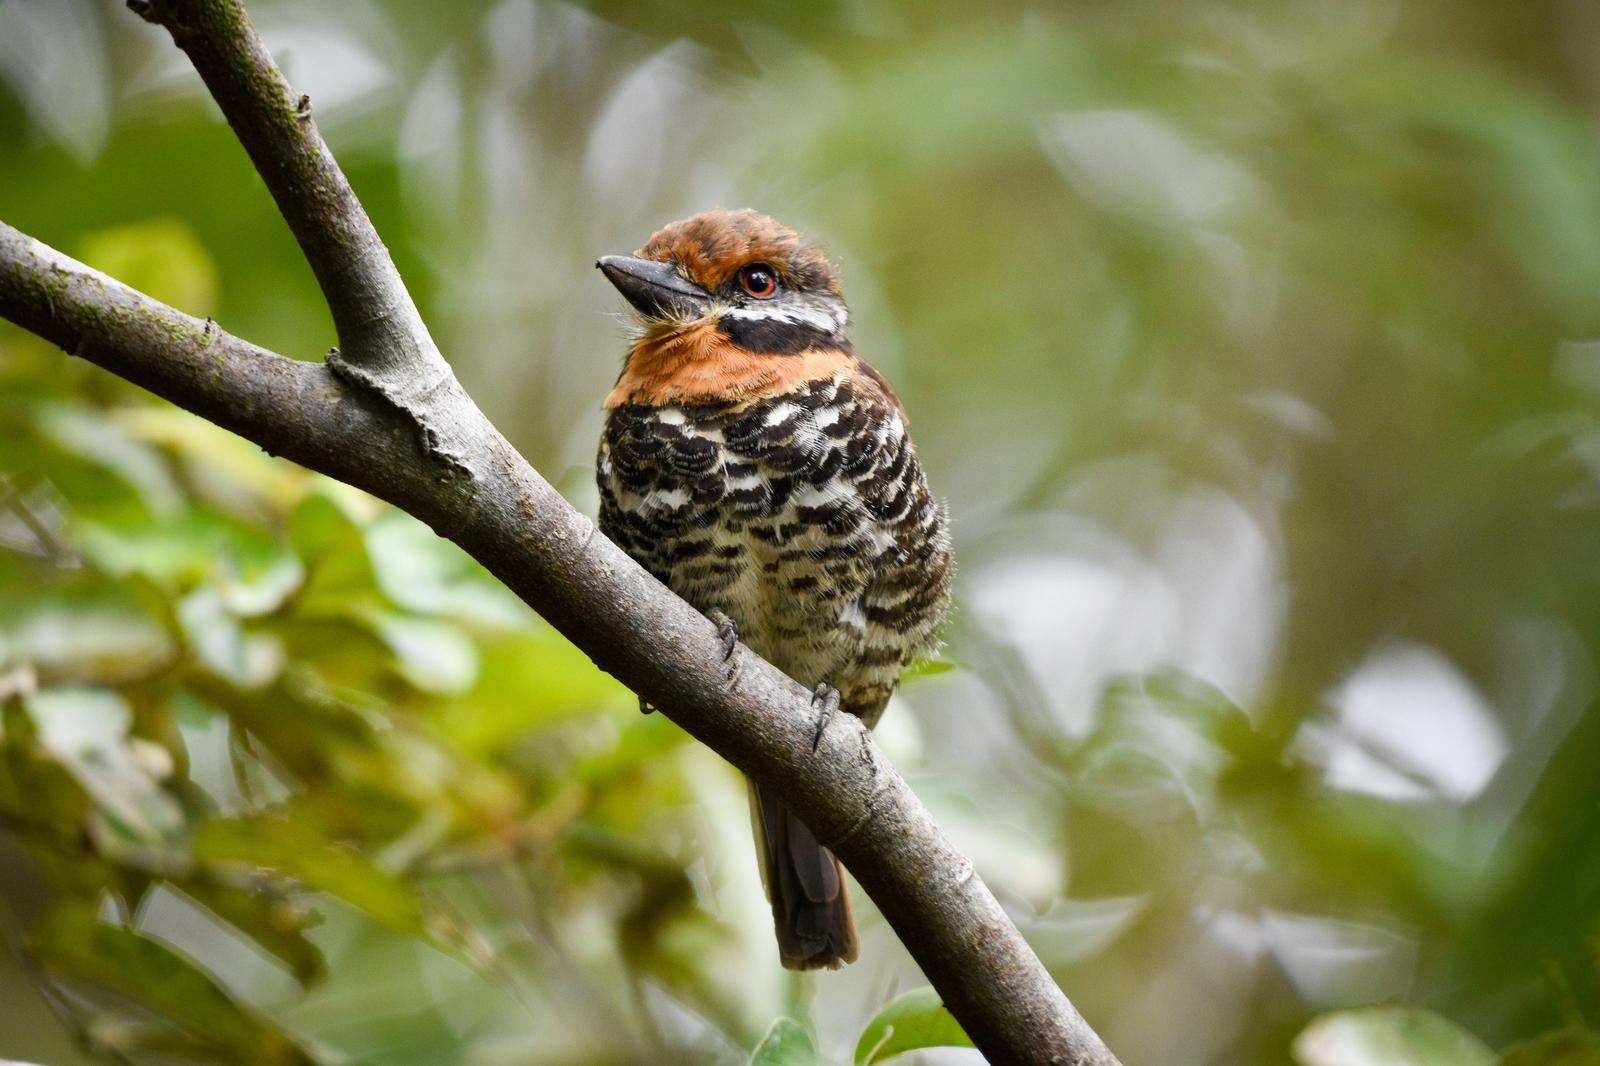 Spotted Puffbird Photo by Julio Delgado